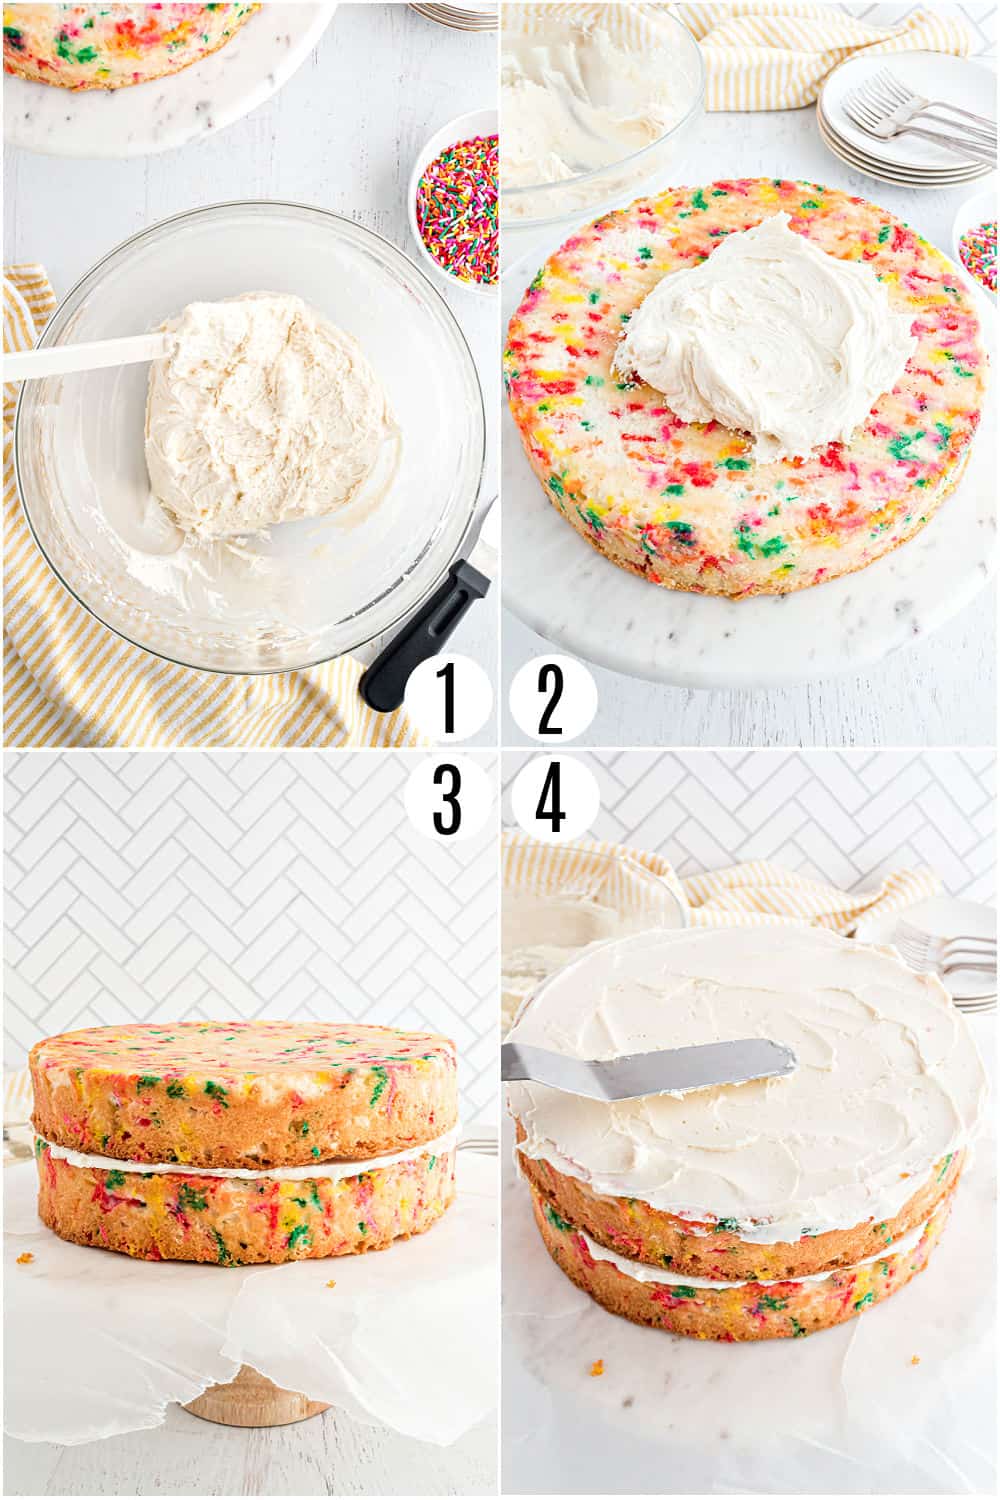 Step by step photos showing how to frost a layer cake.